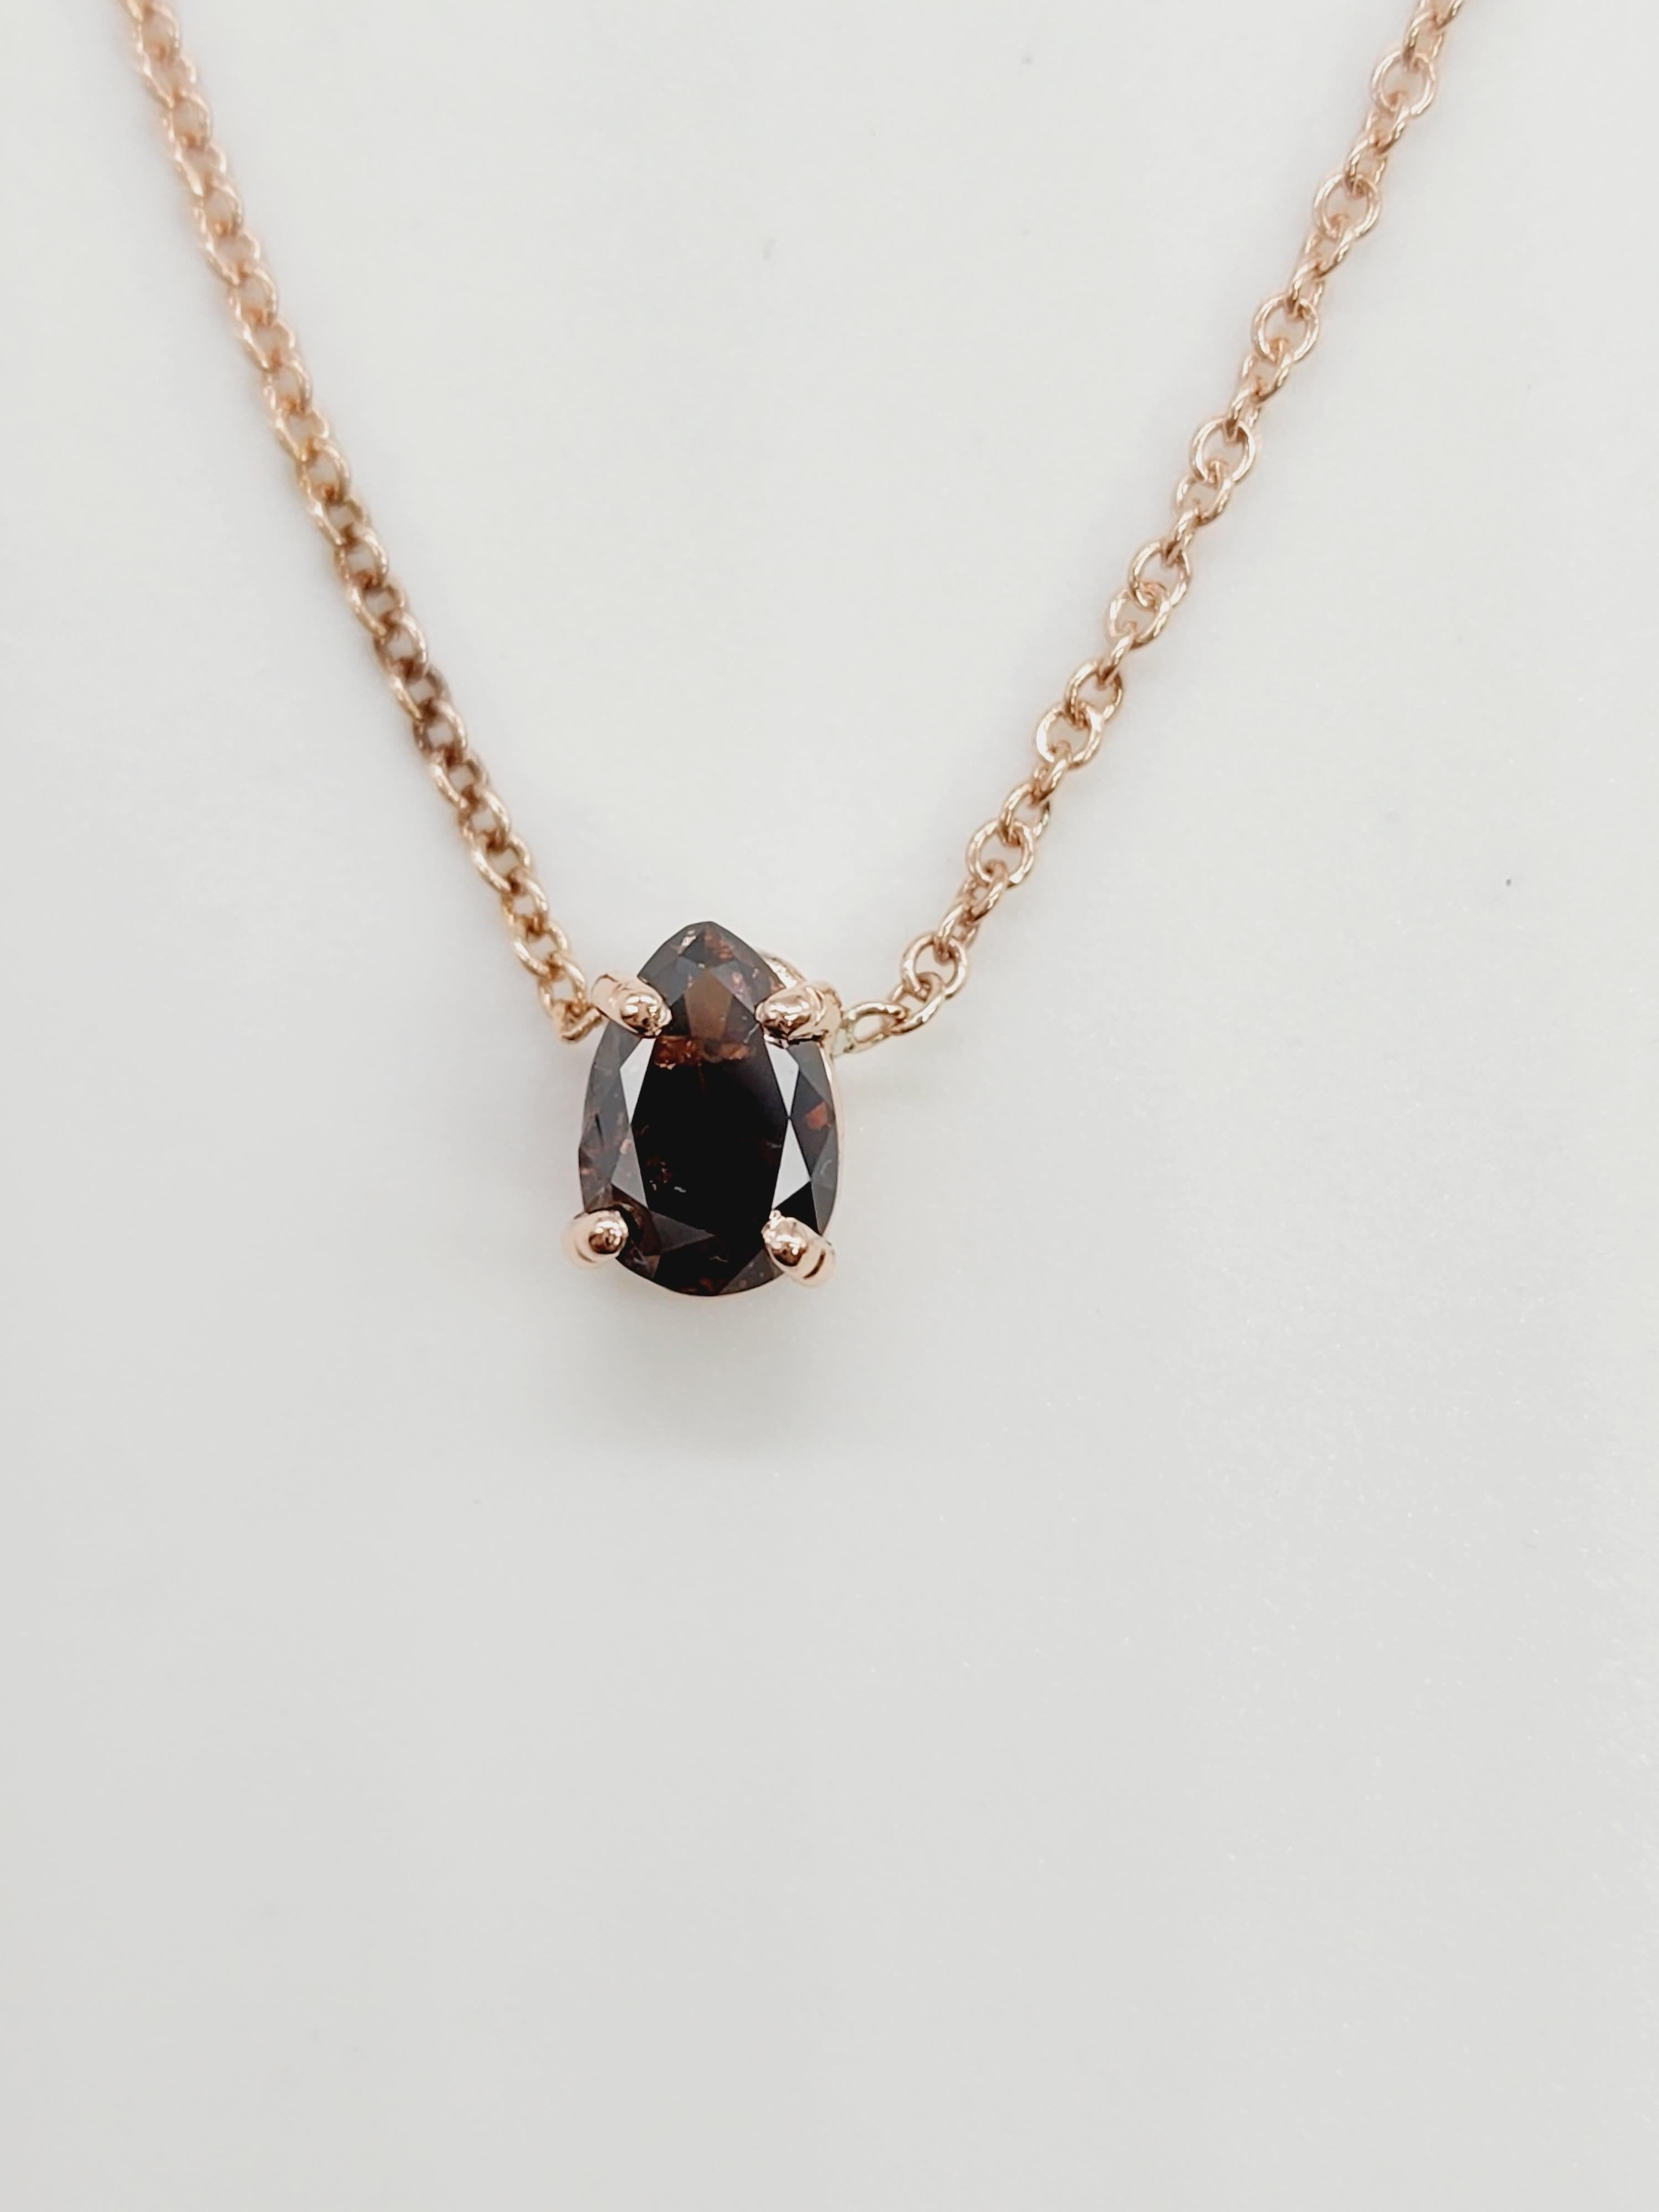 GIA 0.69 Carats Fancy Dark Brown Diamond Pear Shape Pendant Rose Gold 14 Karat In New Condition For Sale In Great Neck, NY